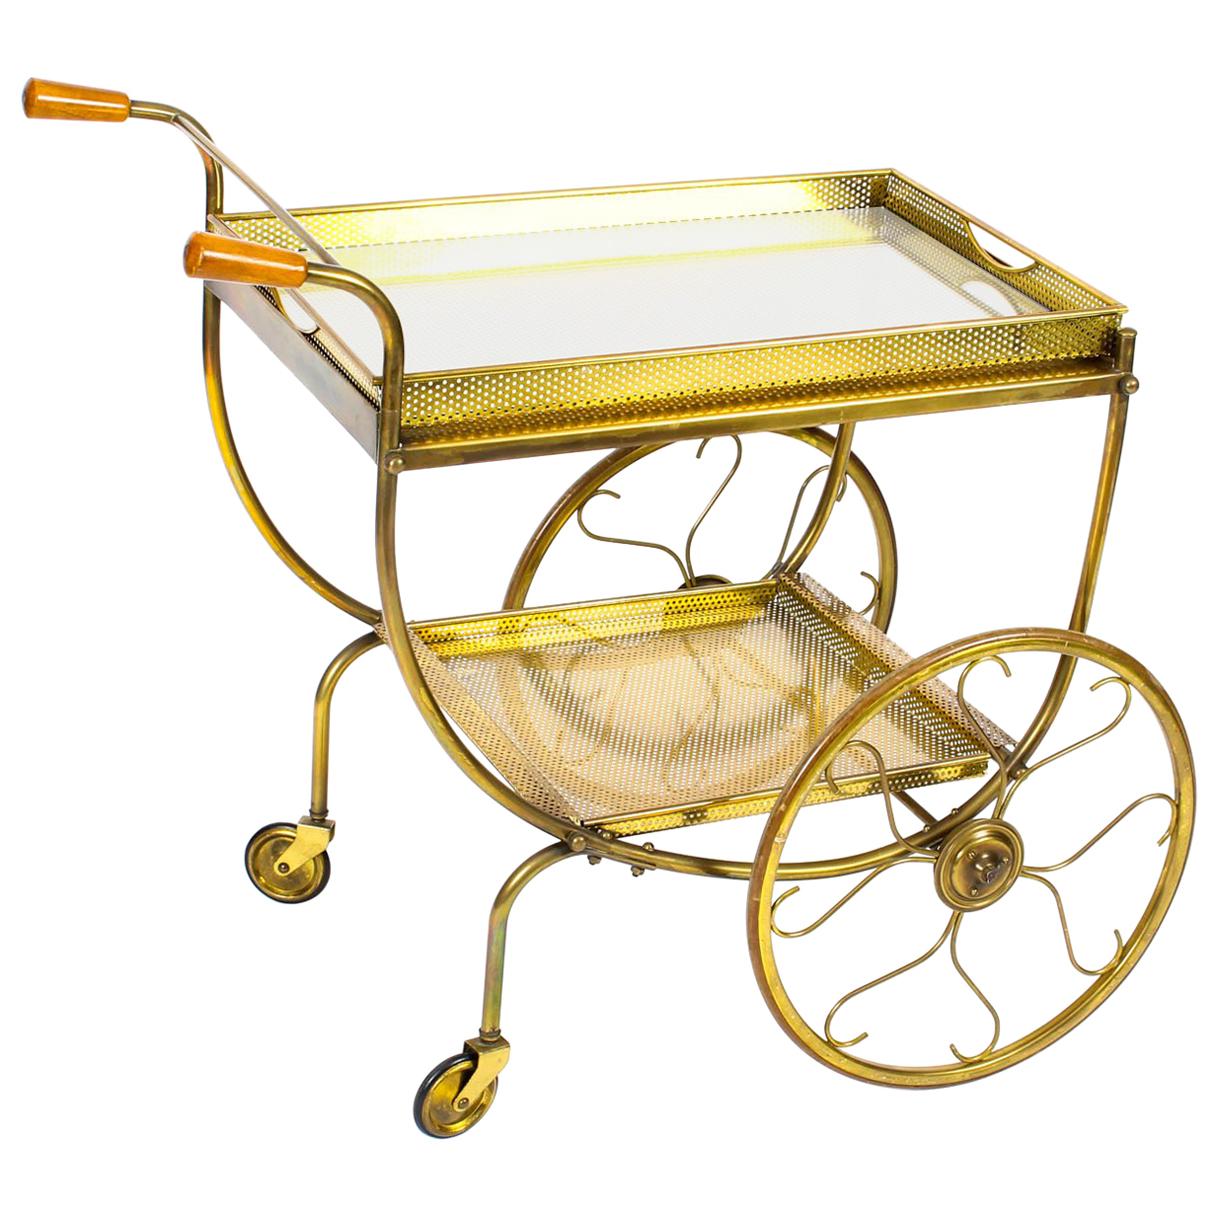 Antique French Modernist Gilded Drinks Serving Trolley, Midcentury